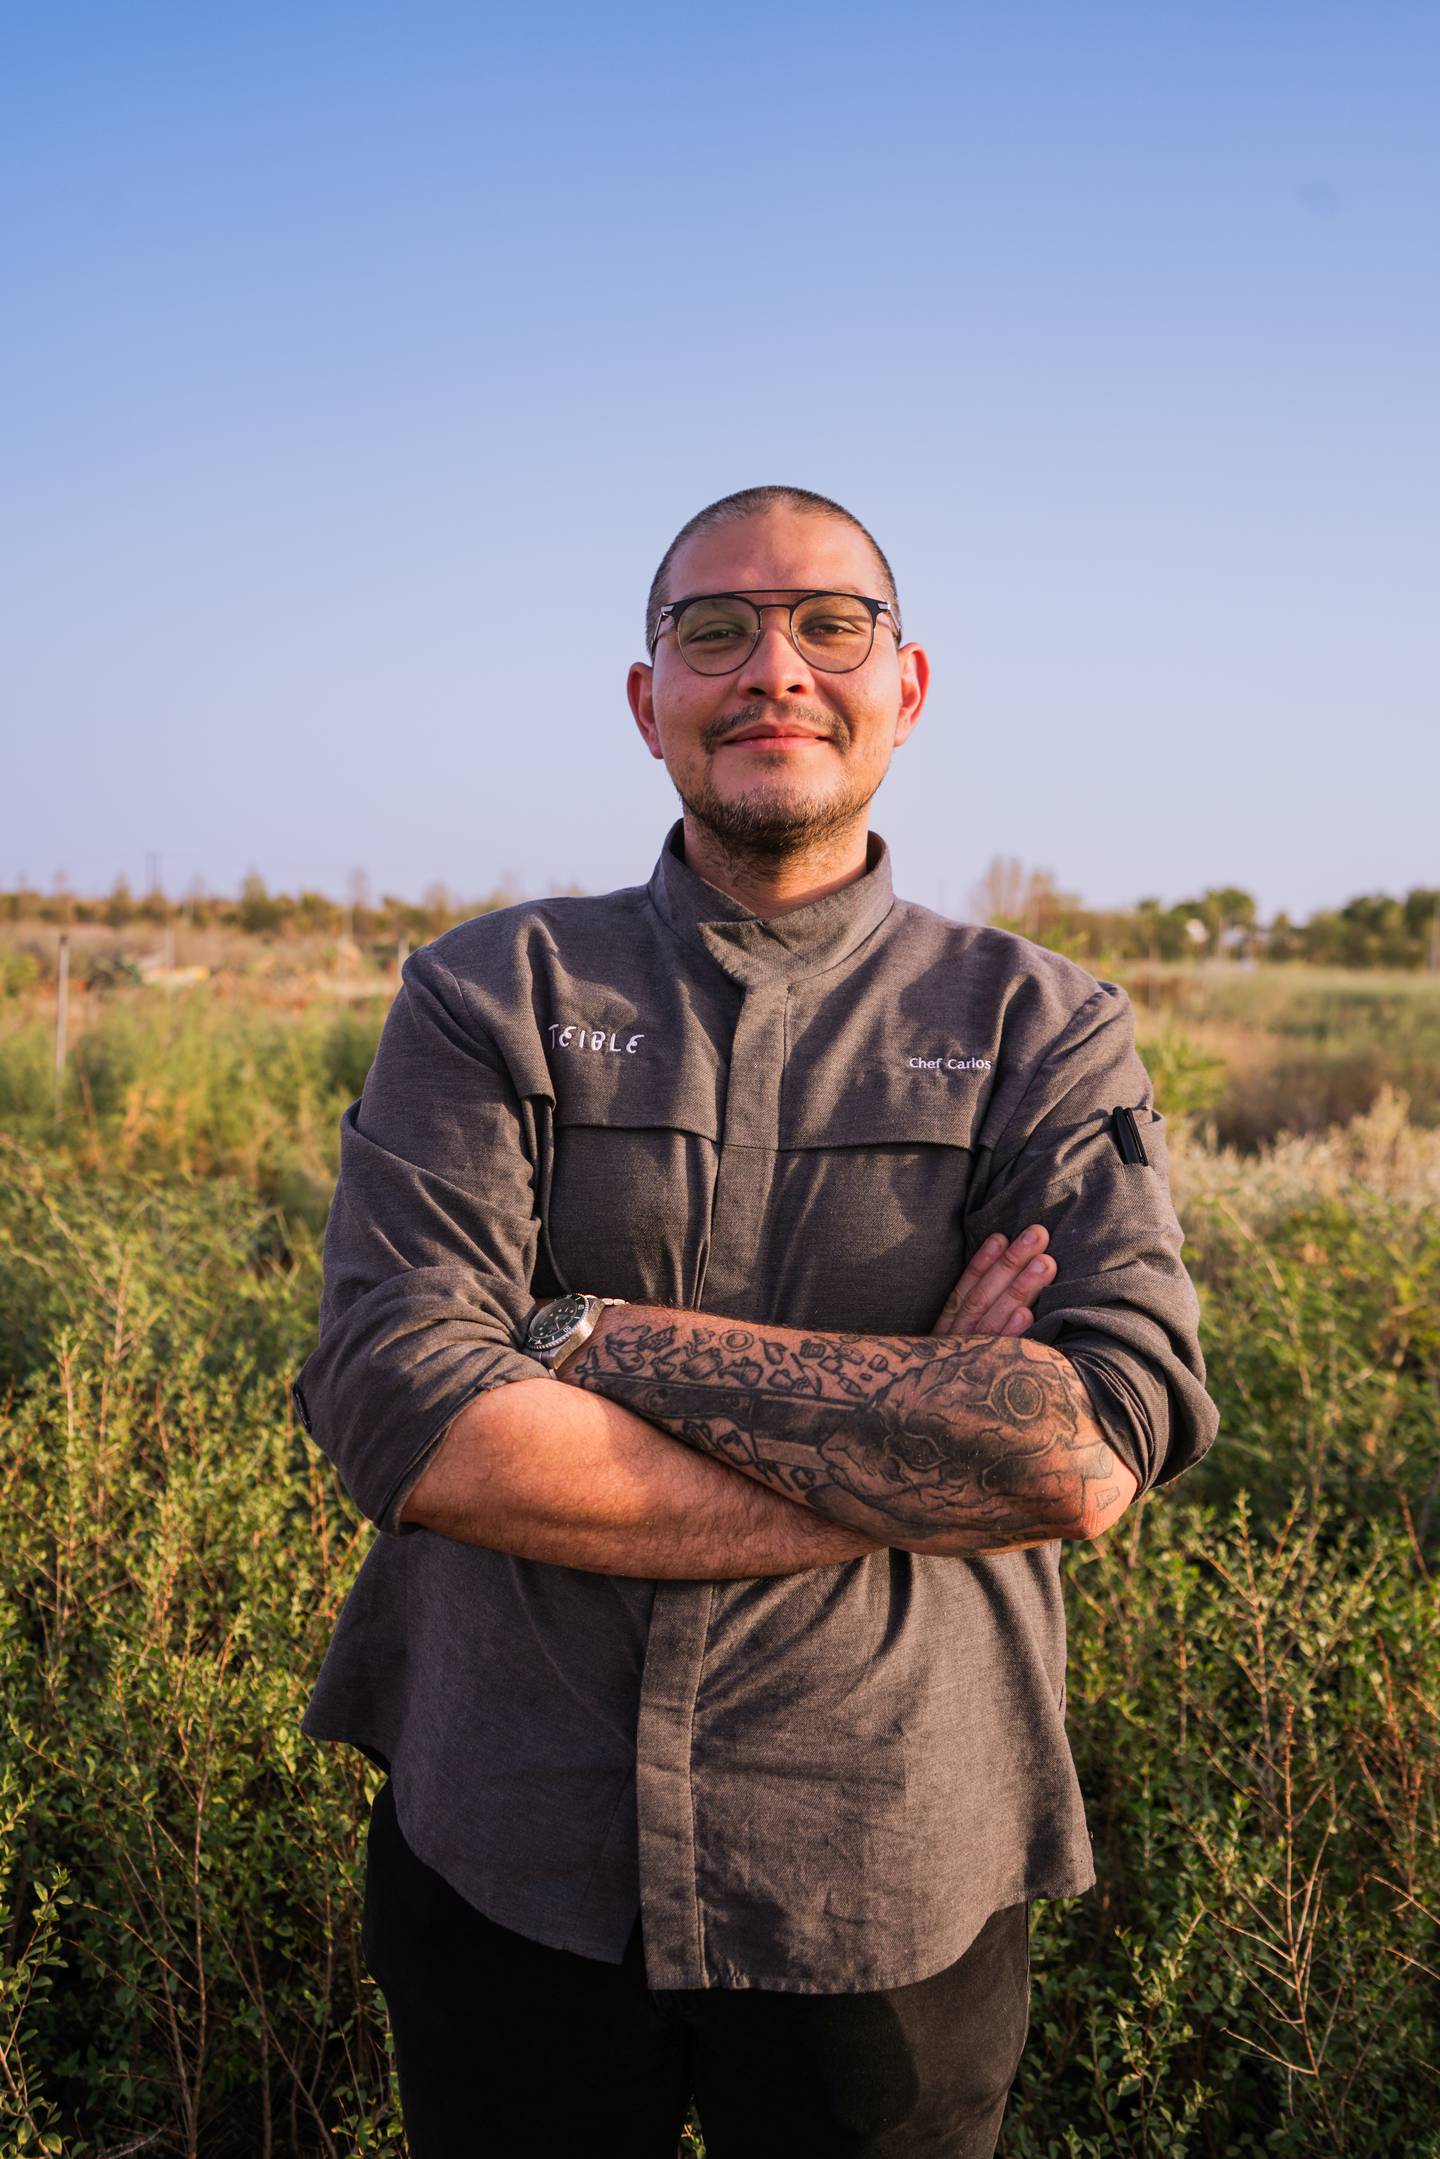 Executive chef Carlos Frunze works closely with local farmers, who he considers part of the Teible team. Photo: Teible